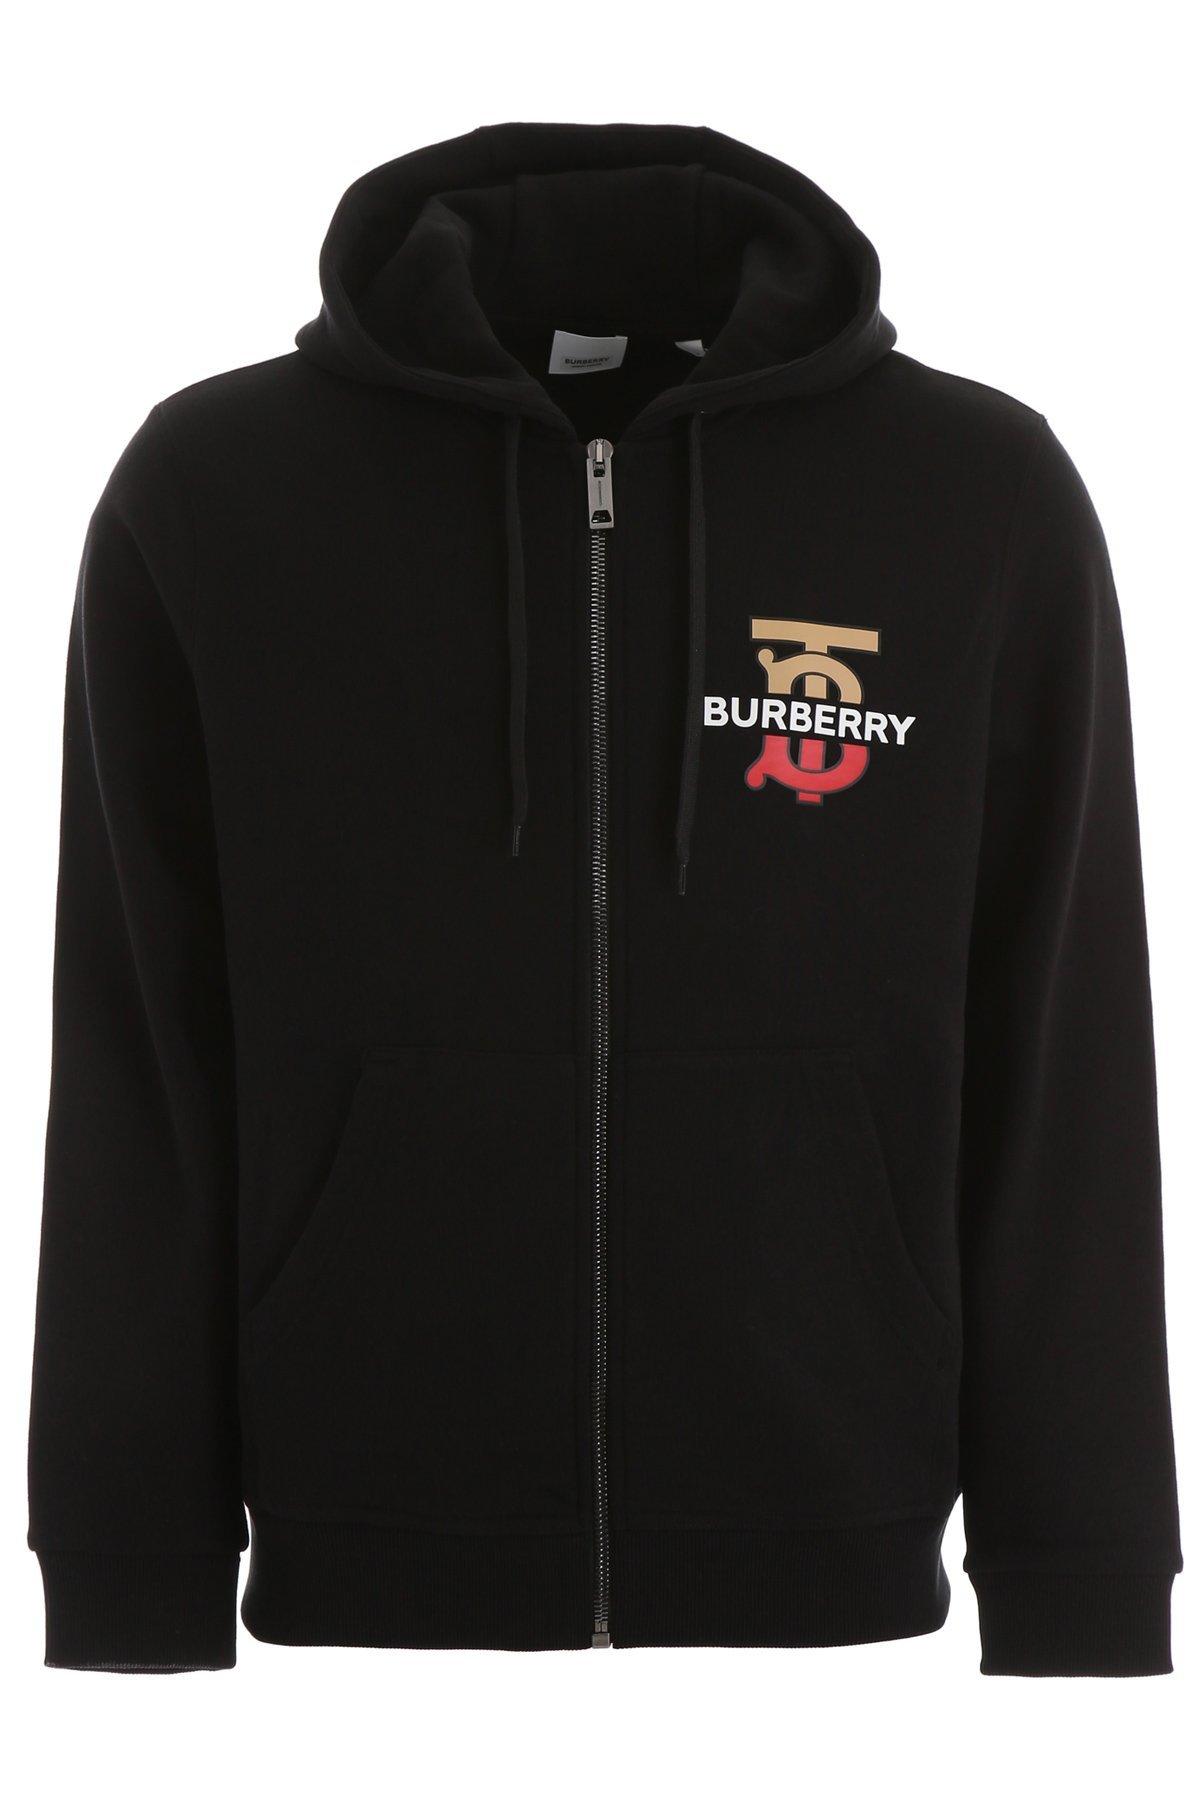 Burberry Cotton Logo Embroidered Zip-up Hoodie in Black for Men - Lyst